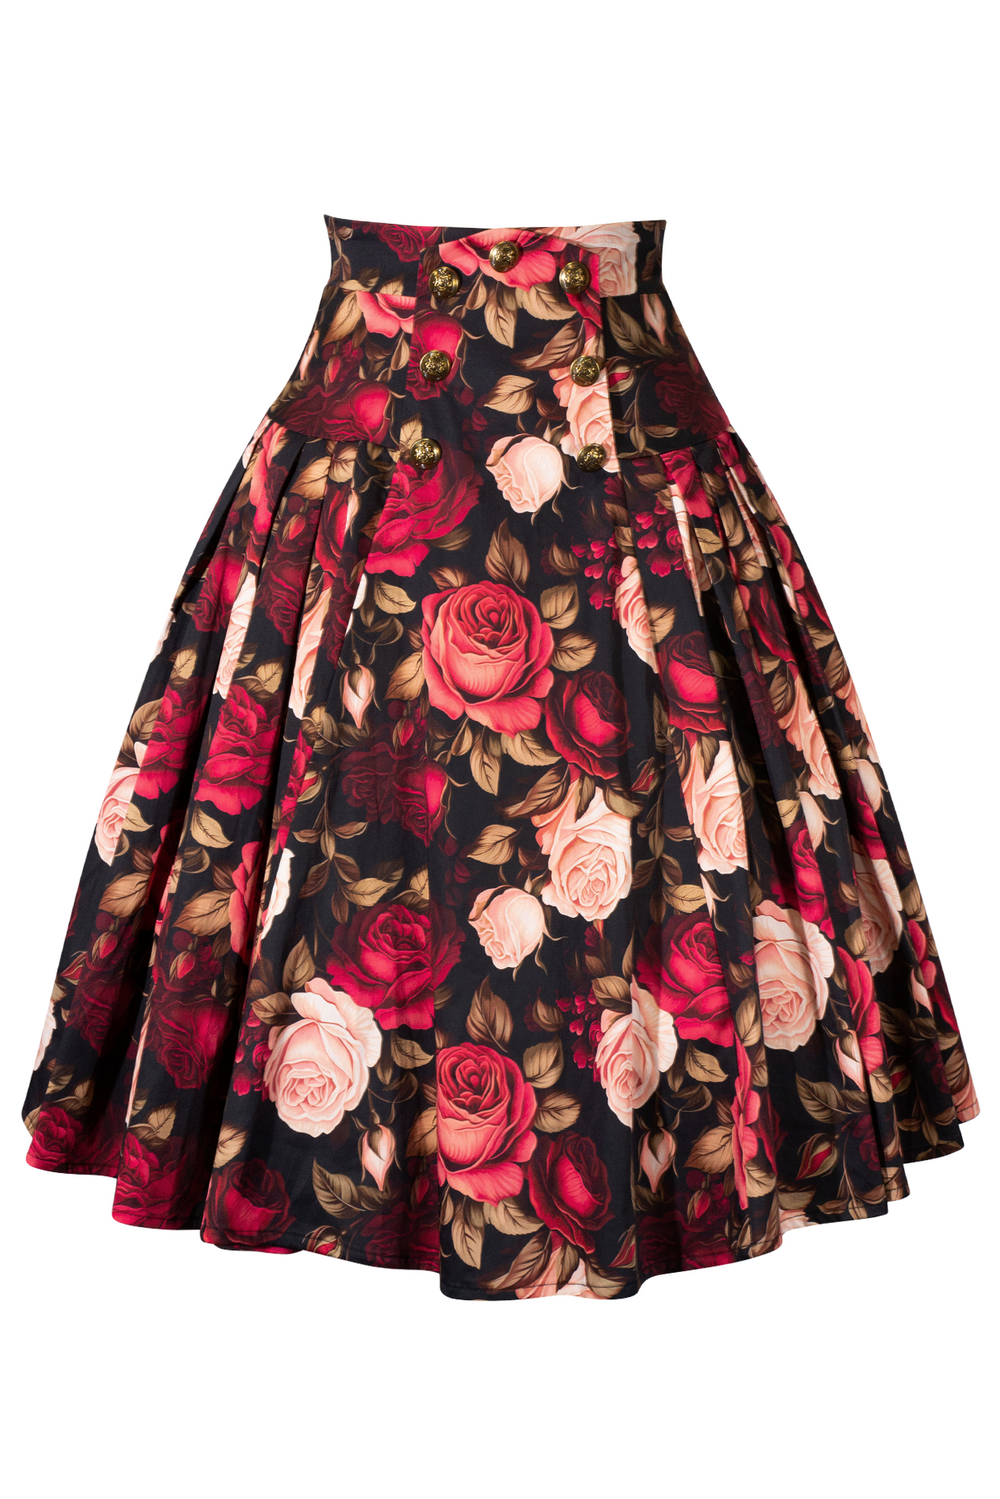 Capone Floral Skirt - Kitten D'Amour